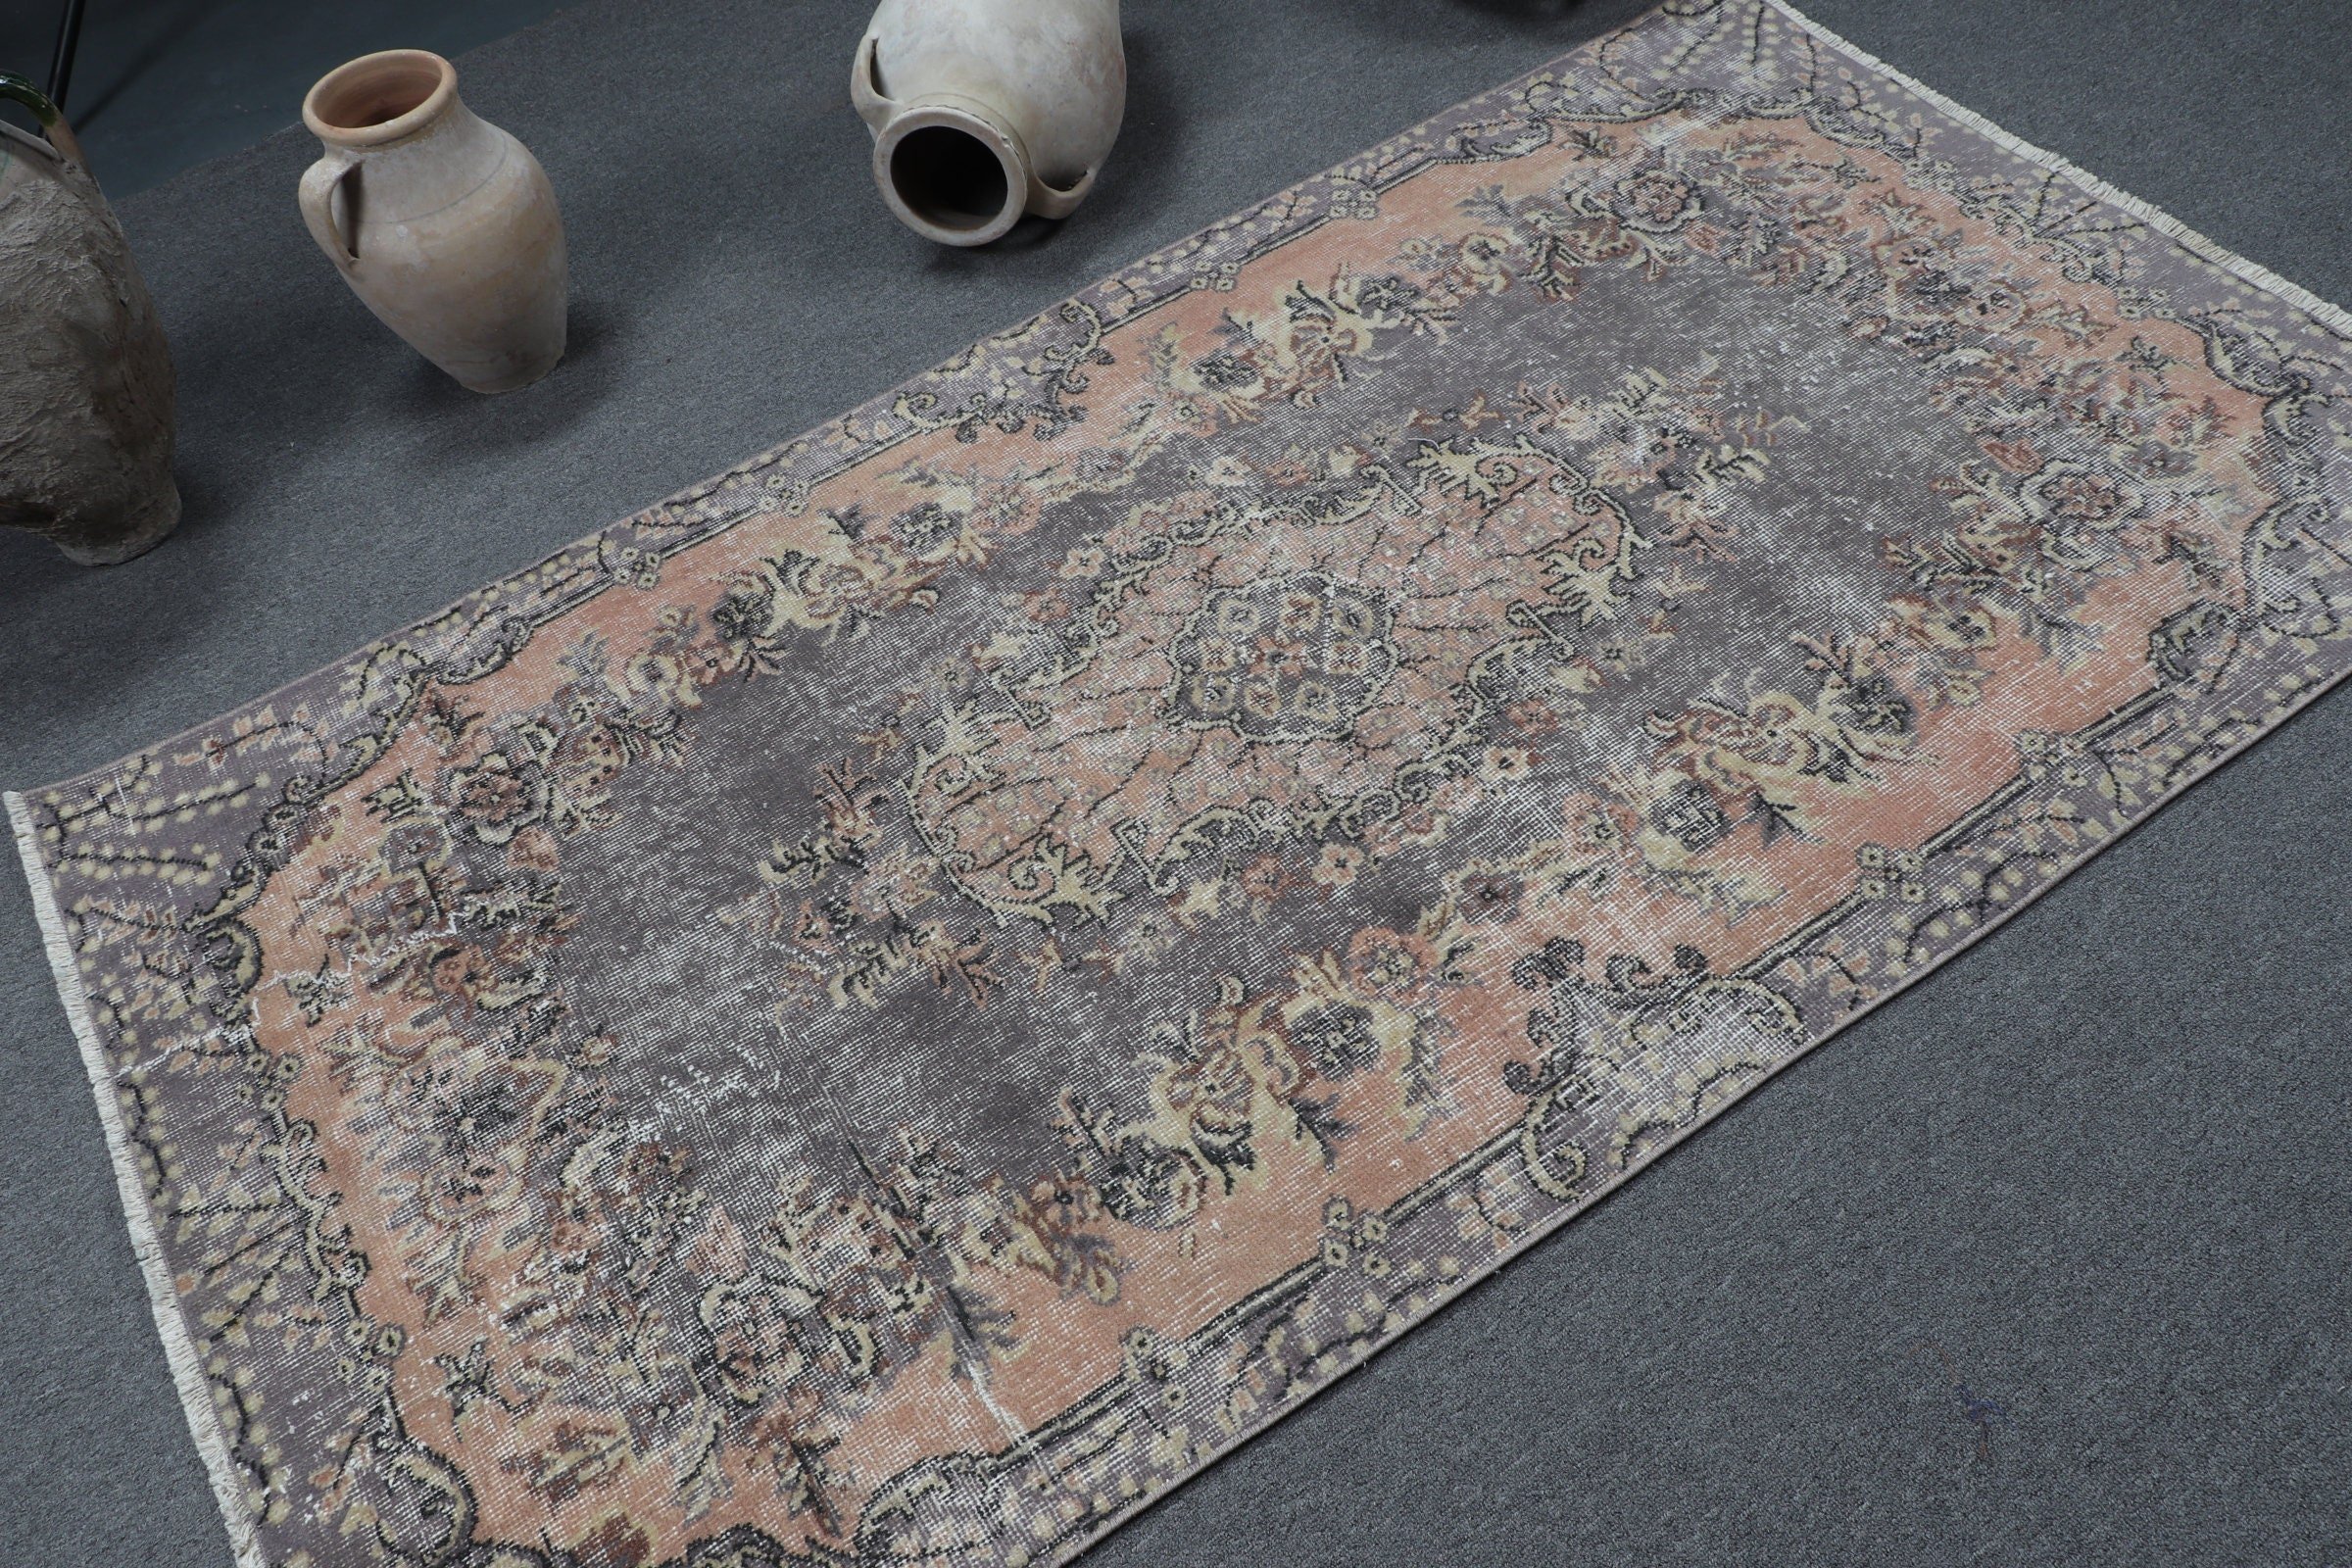 Turkish Rugs, Rugs for Bedroom, 3.7x6.7 ft Area Rugs, Kitchen Rug, Gray Cool Rug, Home Decor Rug, Vintage Rugs, Pale Rugs, Living Room Rugs